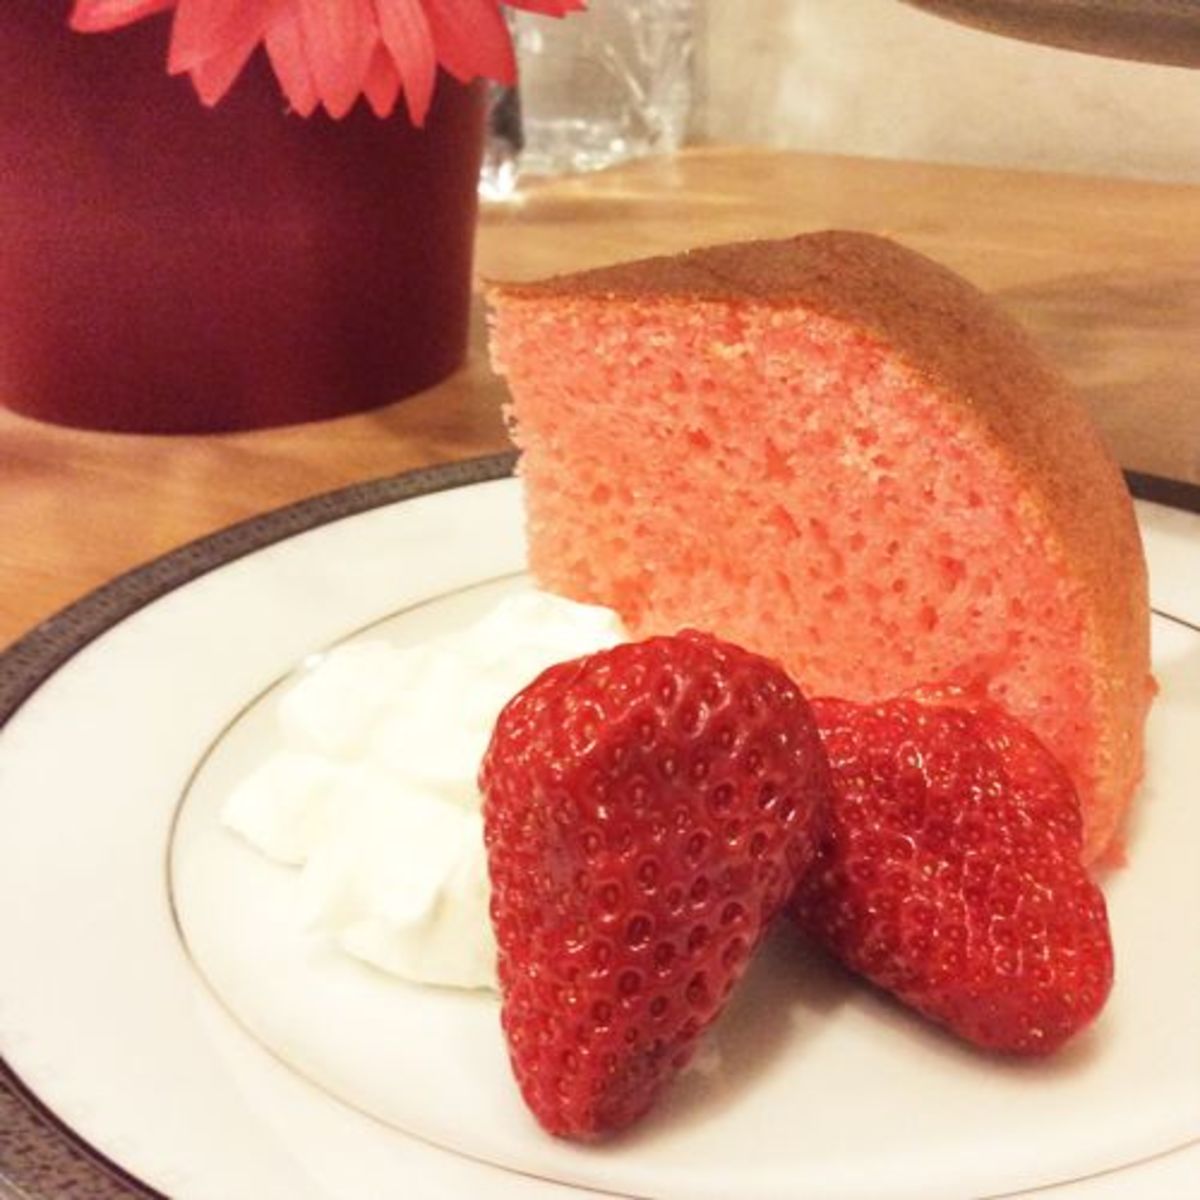 A moist slice of cake made in a rice cooker.